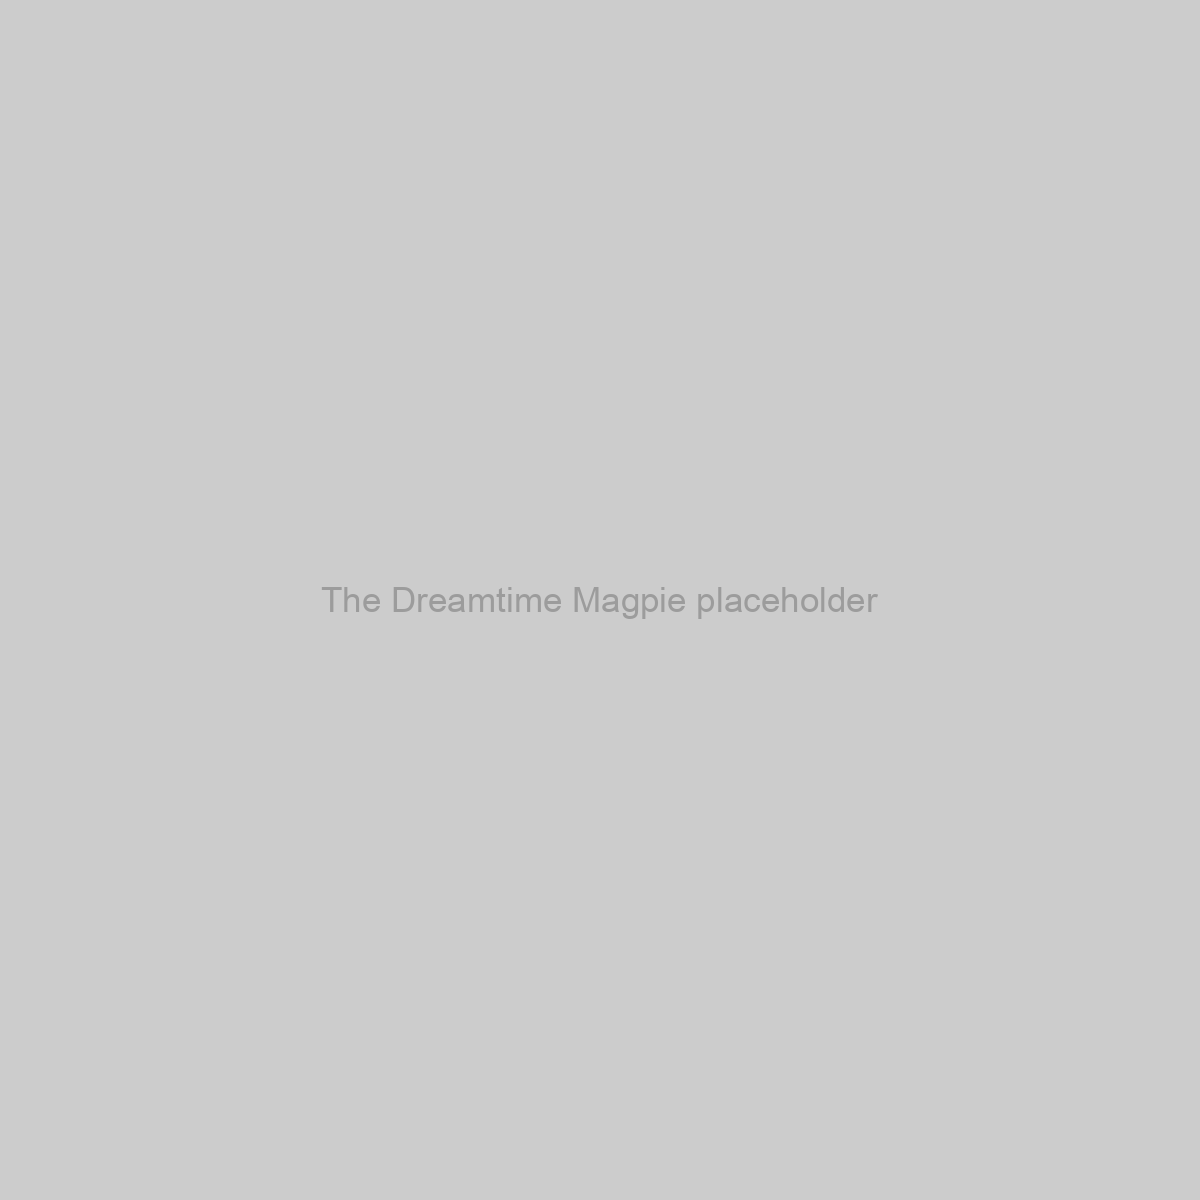 The Dreamtime Magpie Placeholder Image